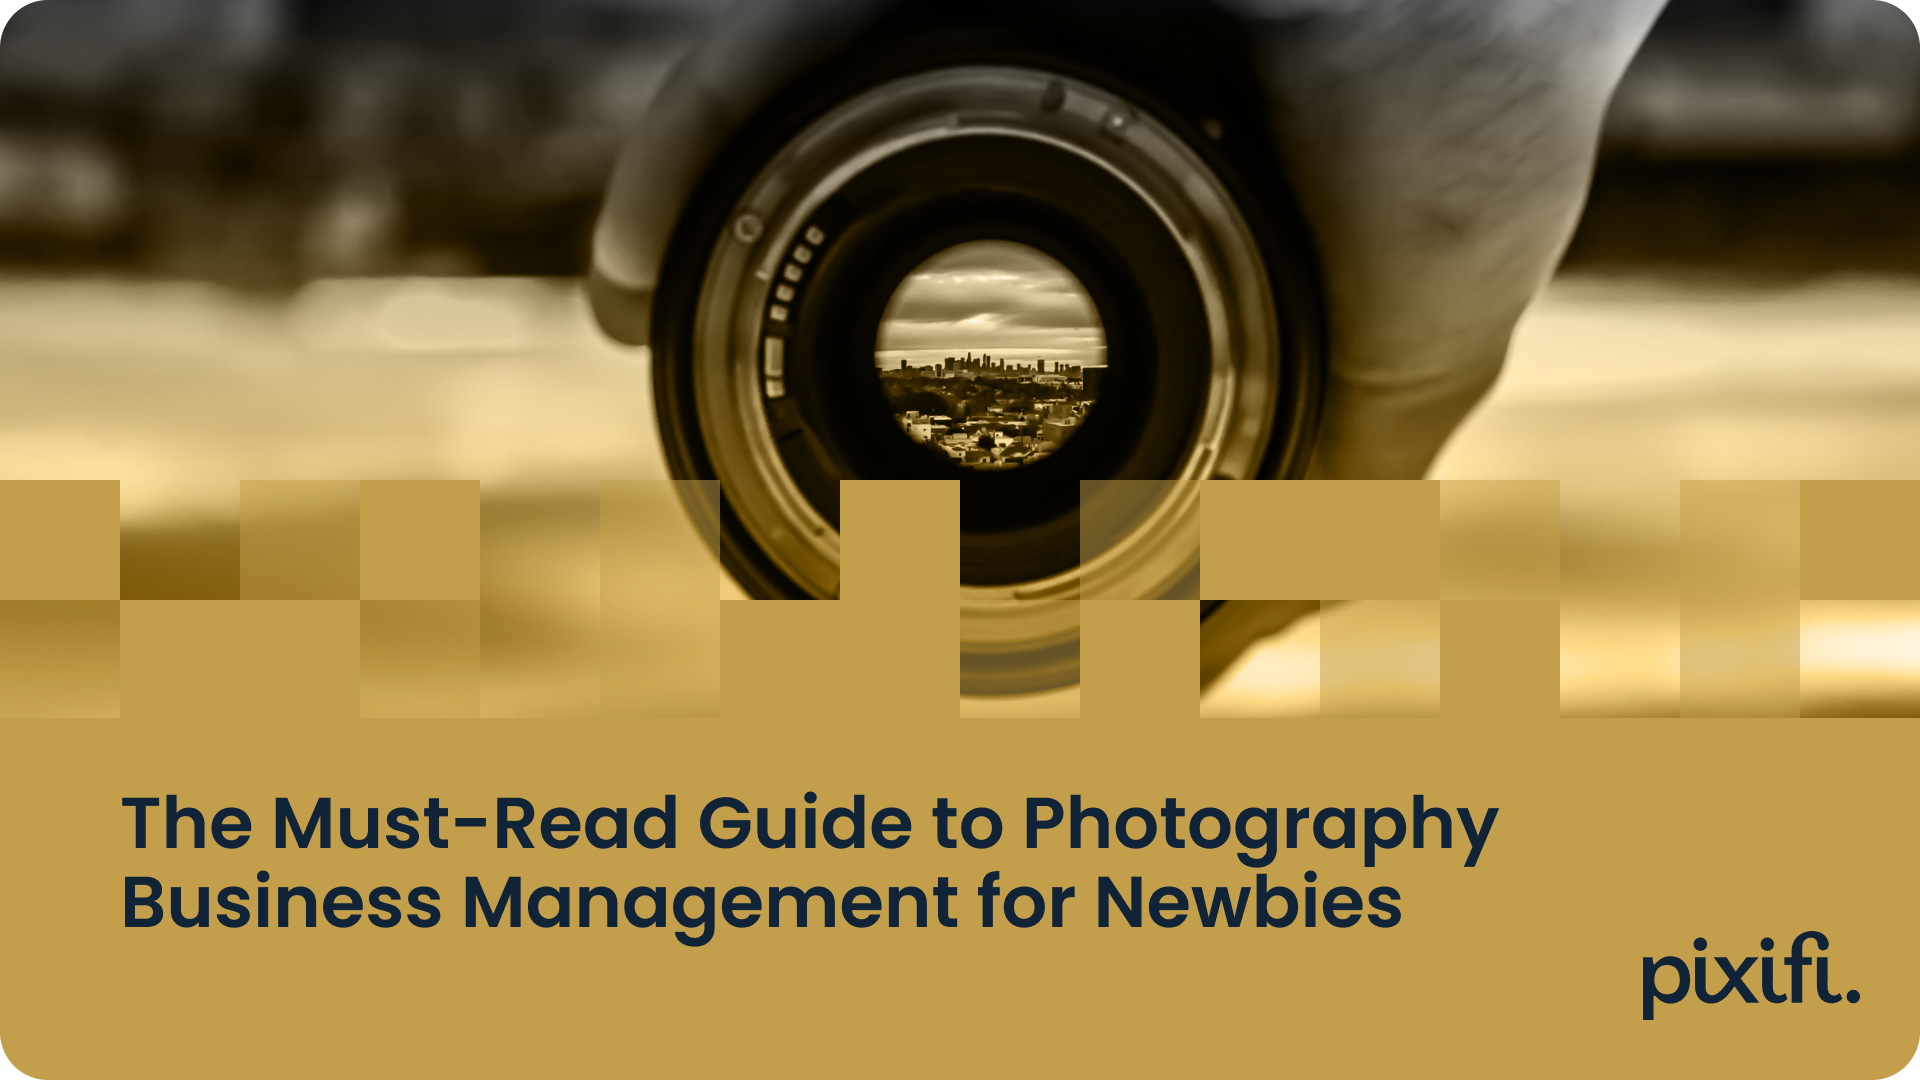 The Must-Read Guide to Photography Business Management for Newbies!